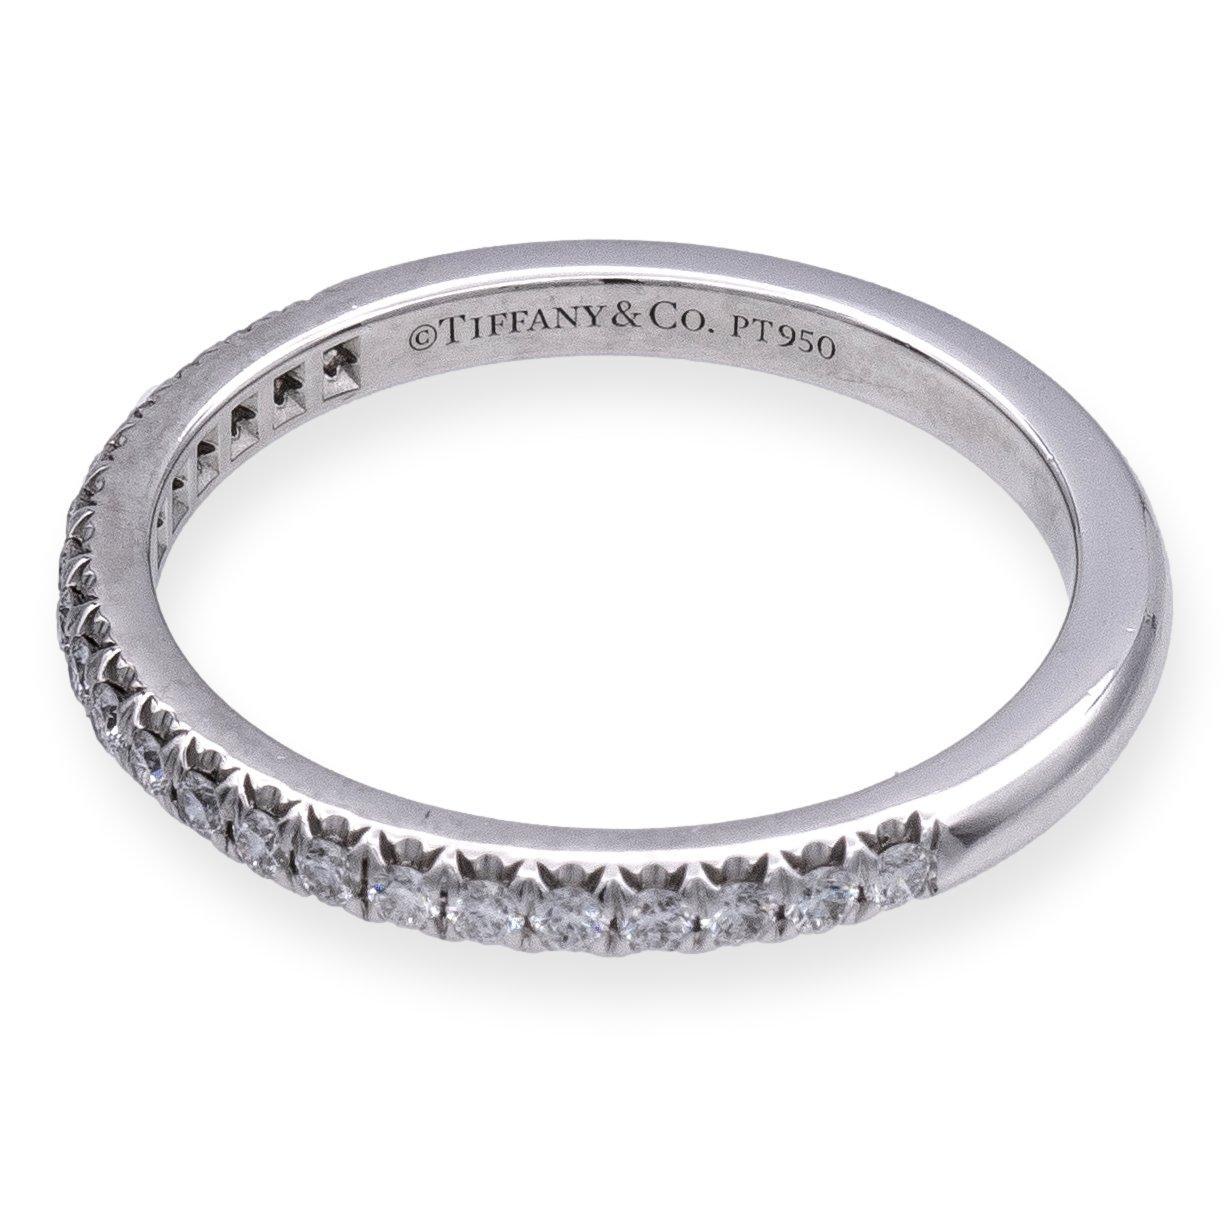 Tiffany & Co. Soleste Wedding/Anniversary Half-Band. Impeccably crafted in platinum, this radiant piece features 21 round brilliant cut diamonds, totaling 0.17 carats. Each diamond is meticulously set in a captivating 